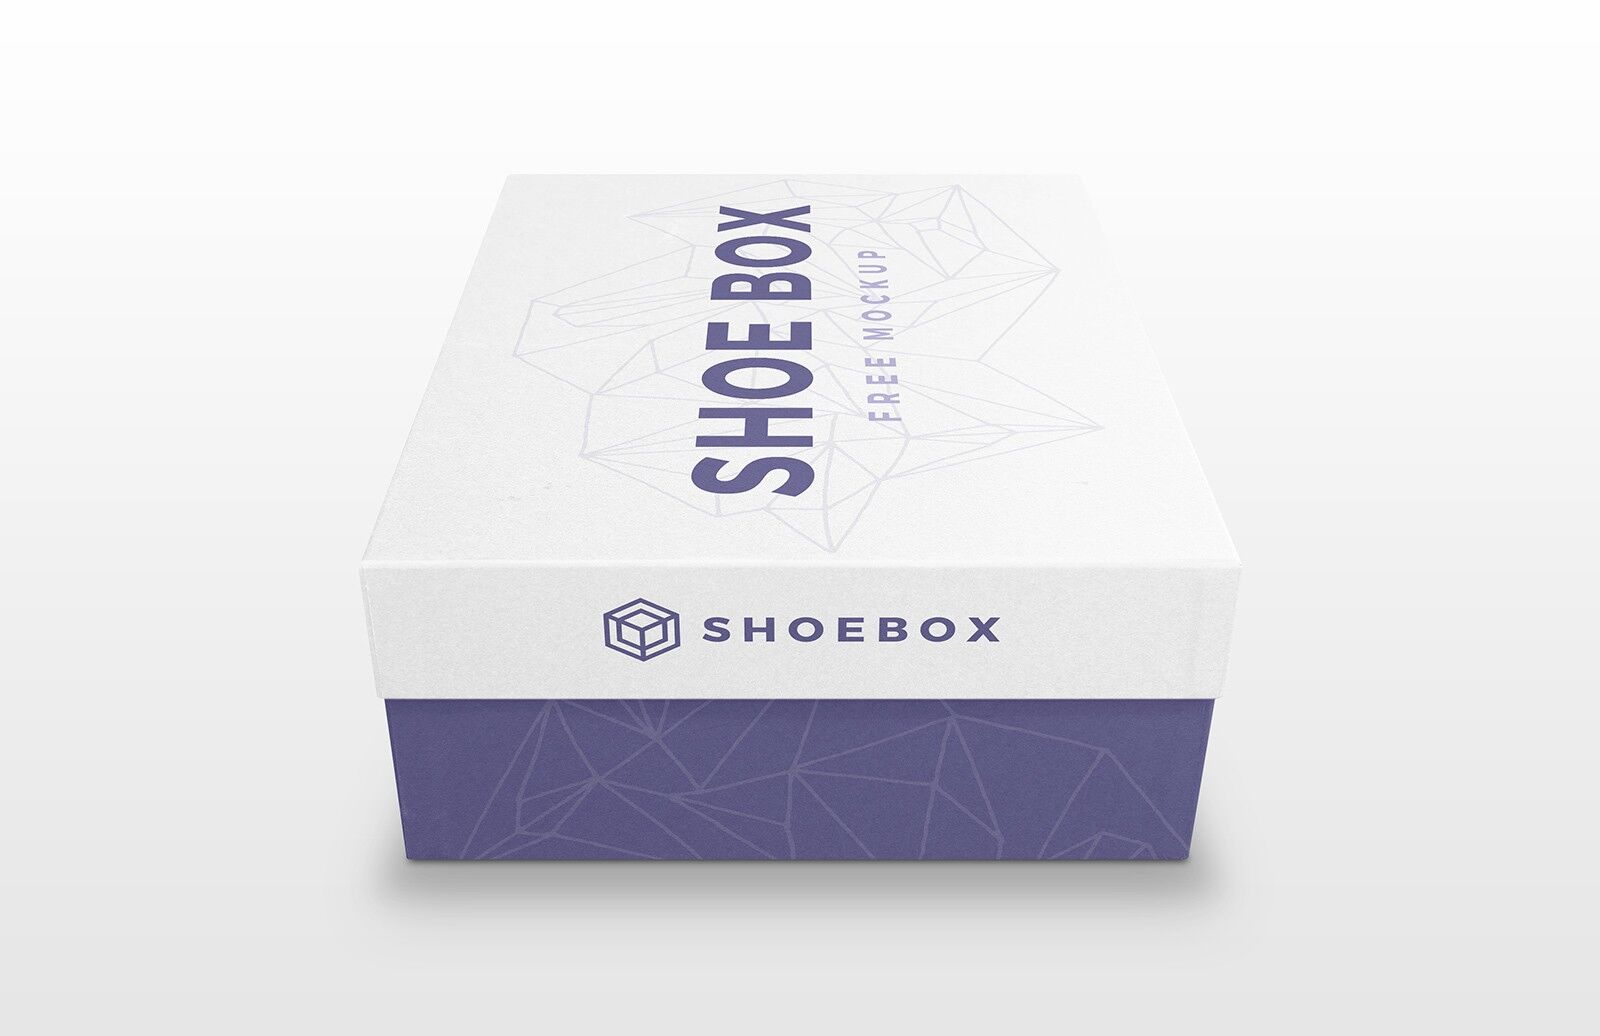 Shoebox Mockup In Different Angles FREE PSD